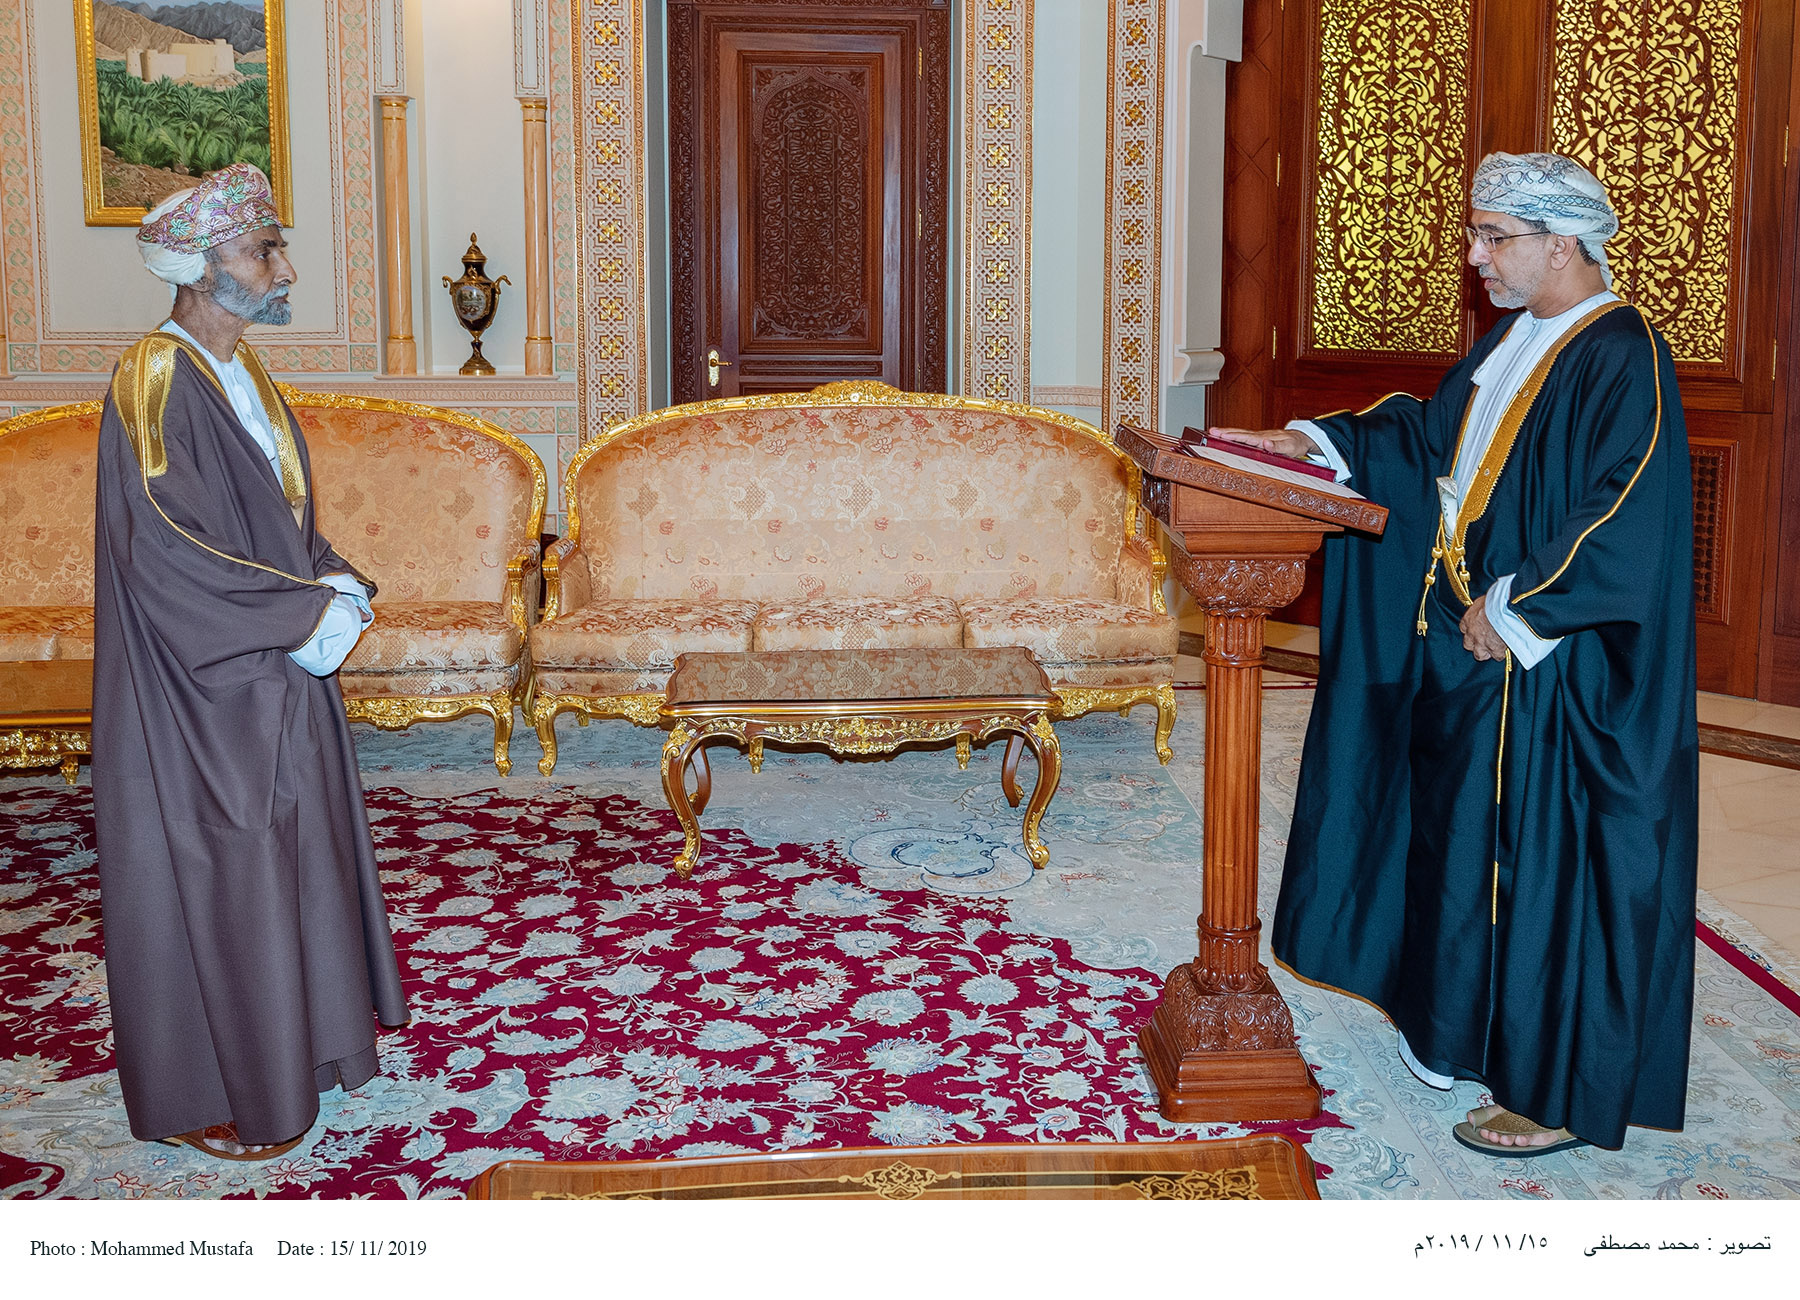 Before His Majesty, new ministers take oath